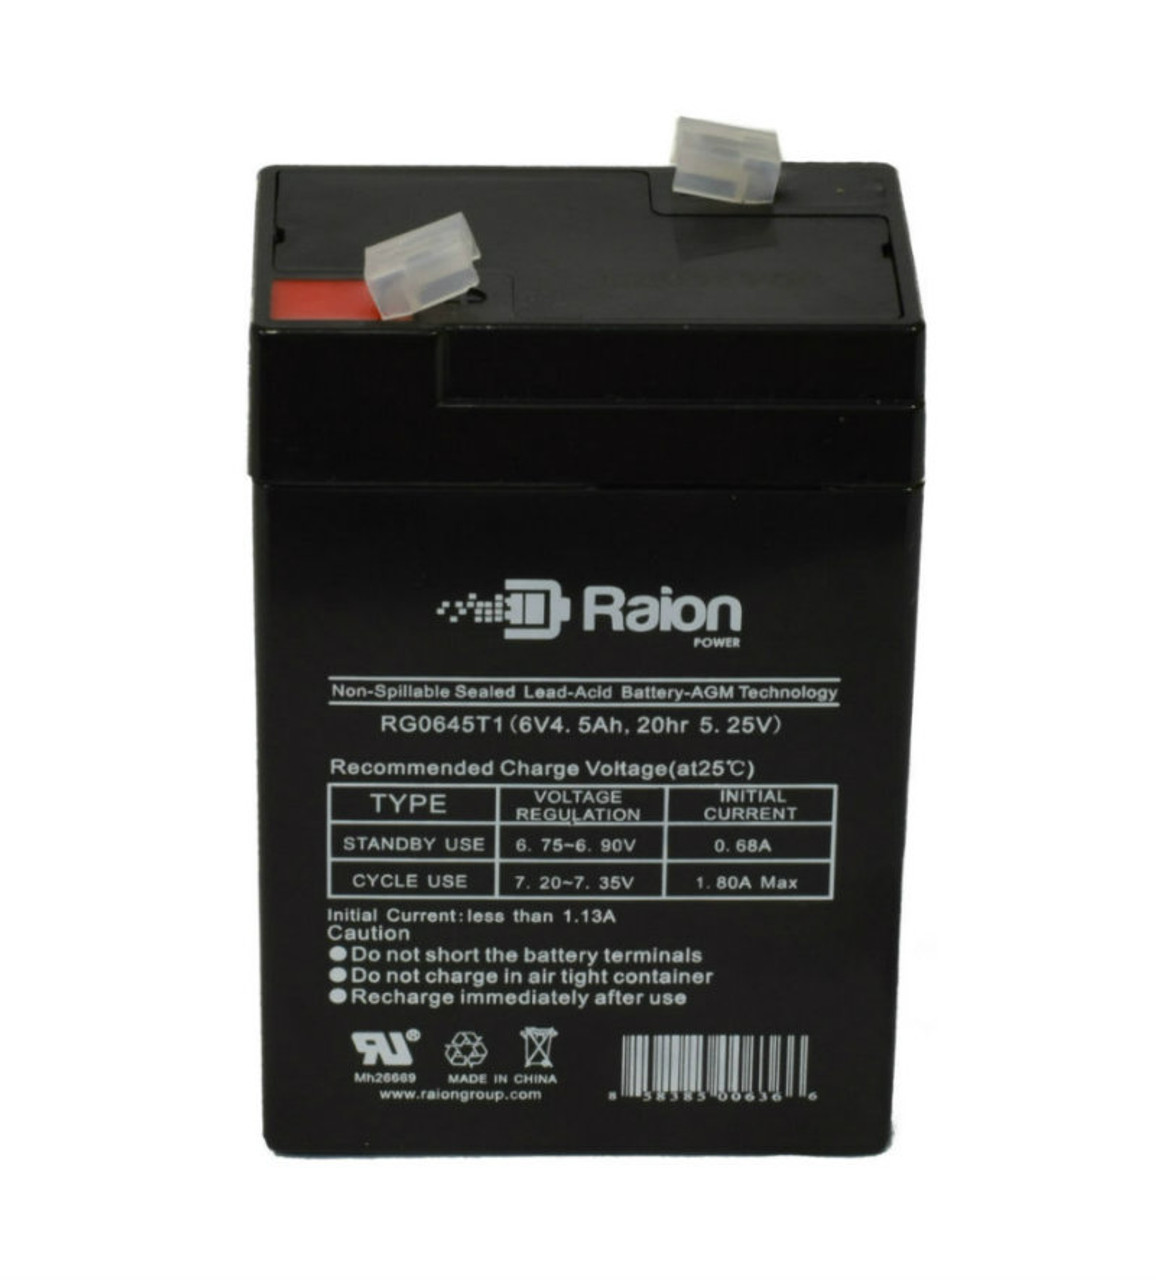 Raion Power RG0645T1 Replacement Battery Cartridge for Light Alarms CE15BS